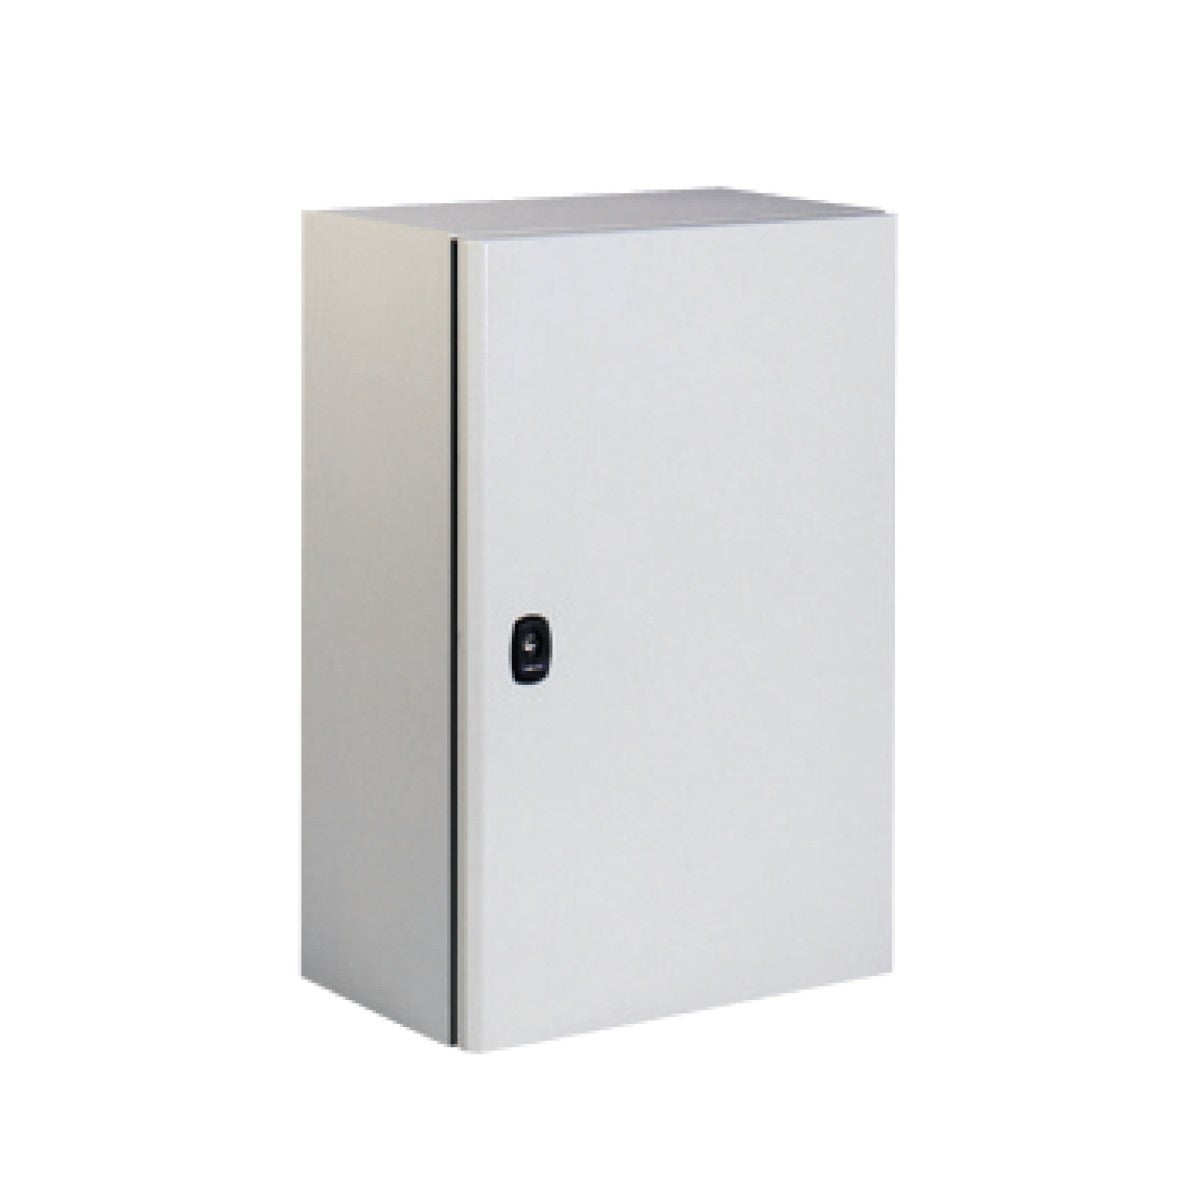 Wall mounted steel enclosure, Spacial S3D, plain door, without mounting plate, 1200x1000x300mm, IP66, IK10